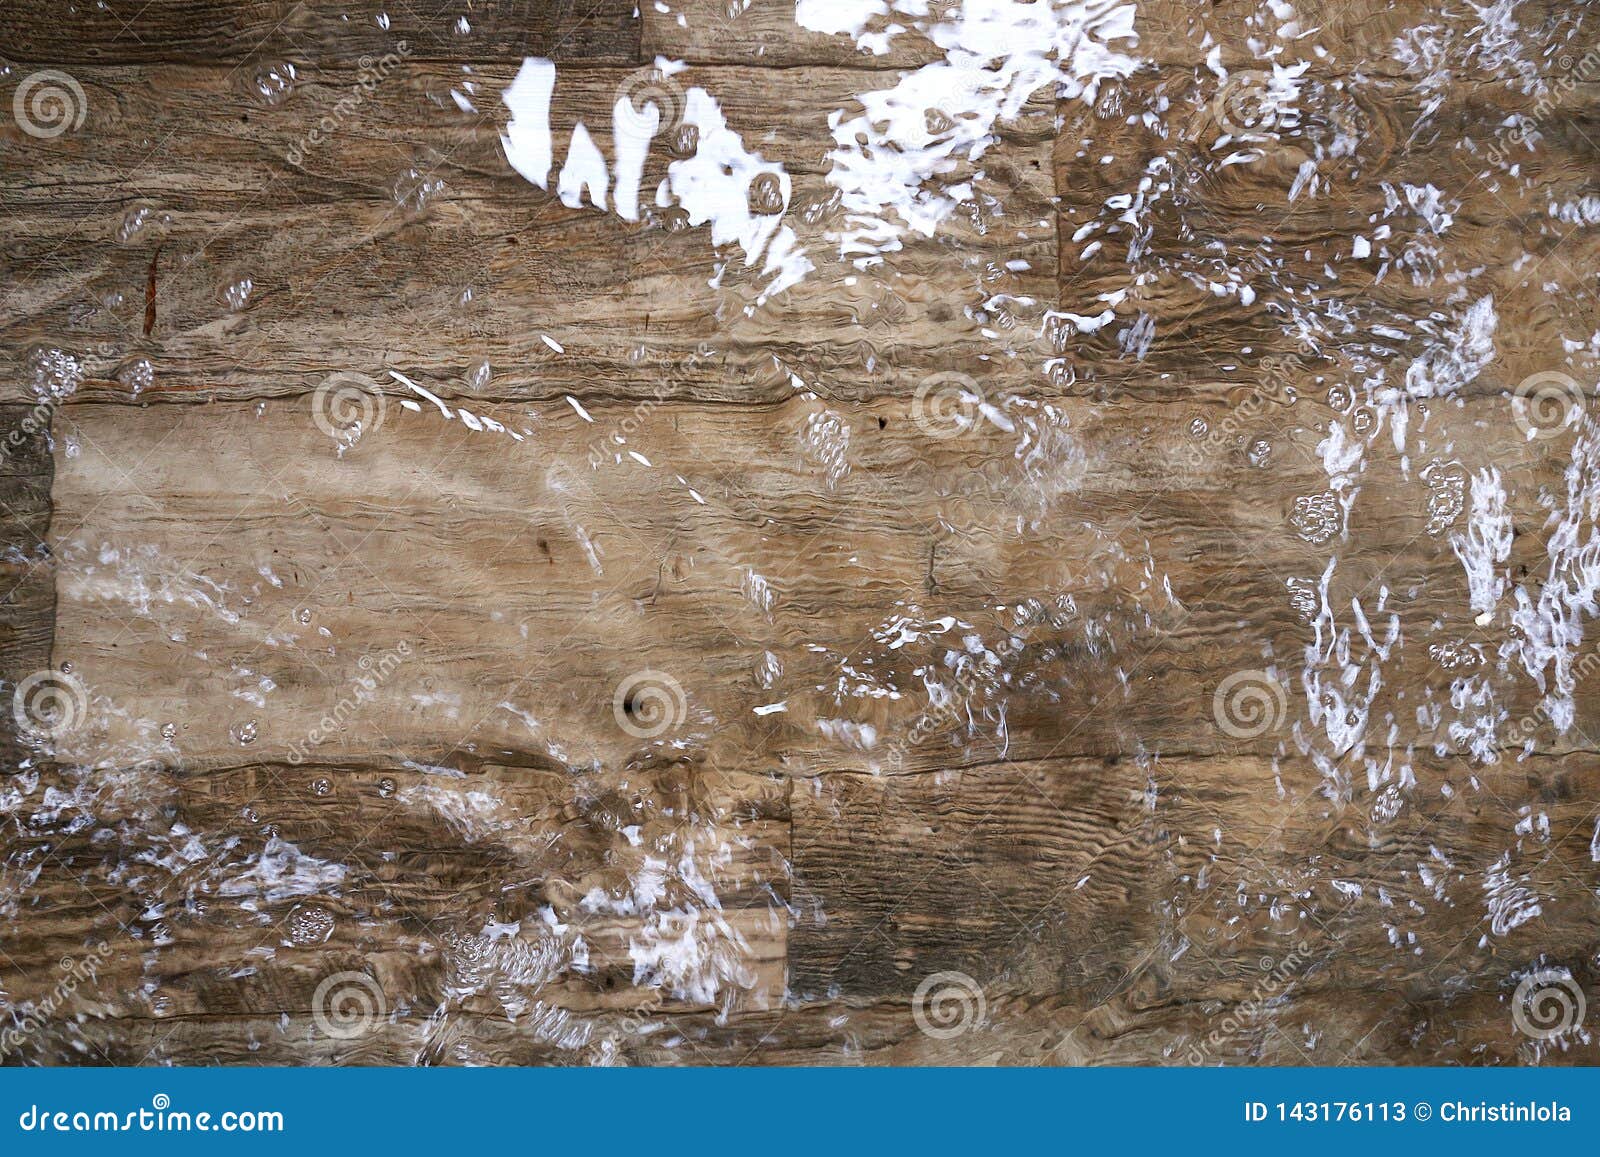 Home Interior Wood Vinyl Flooring Covered In Flood Water After